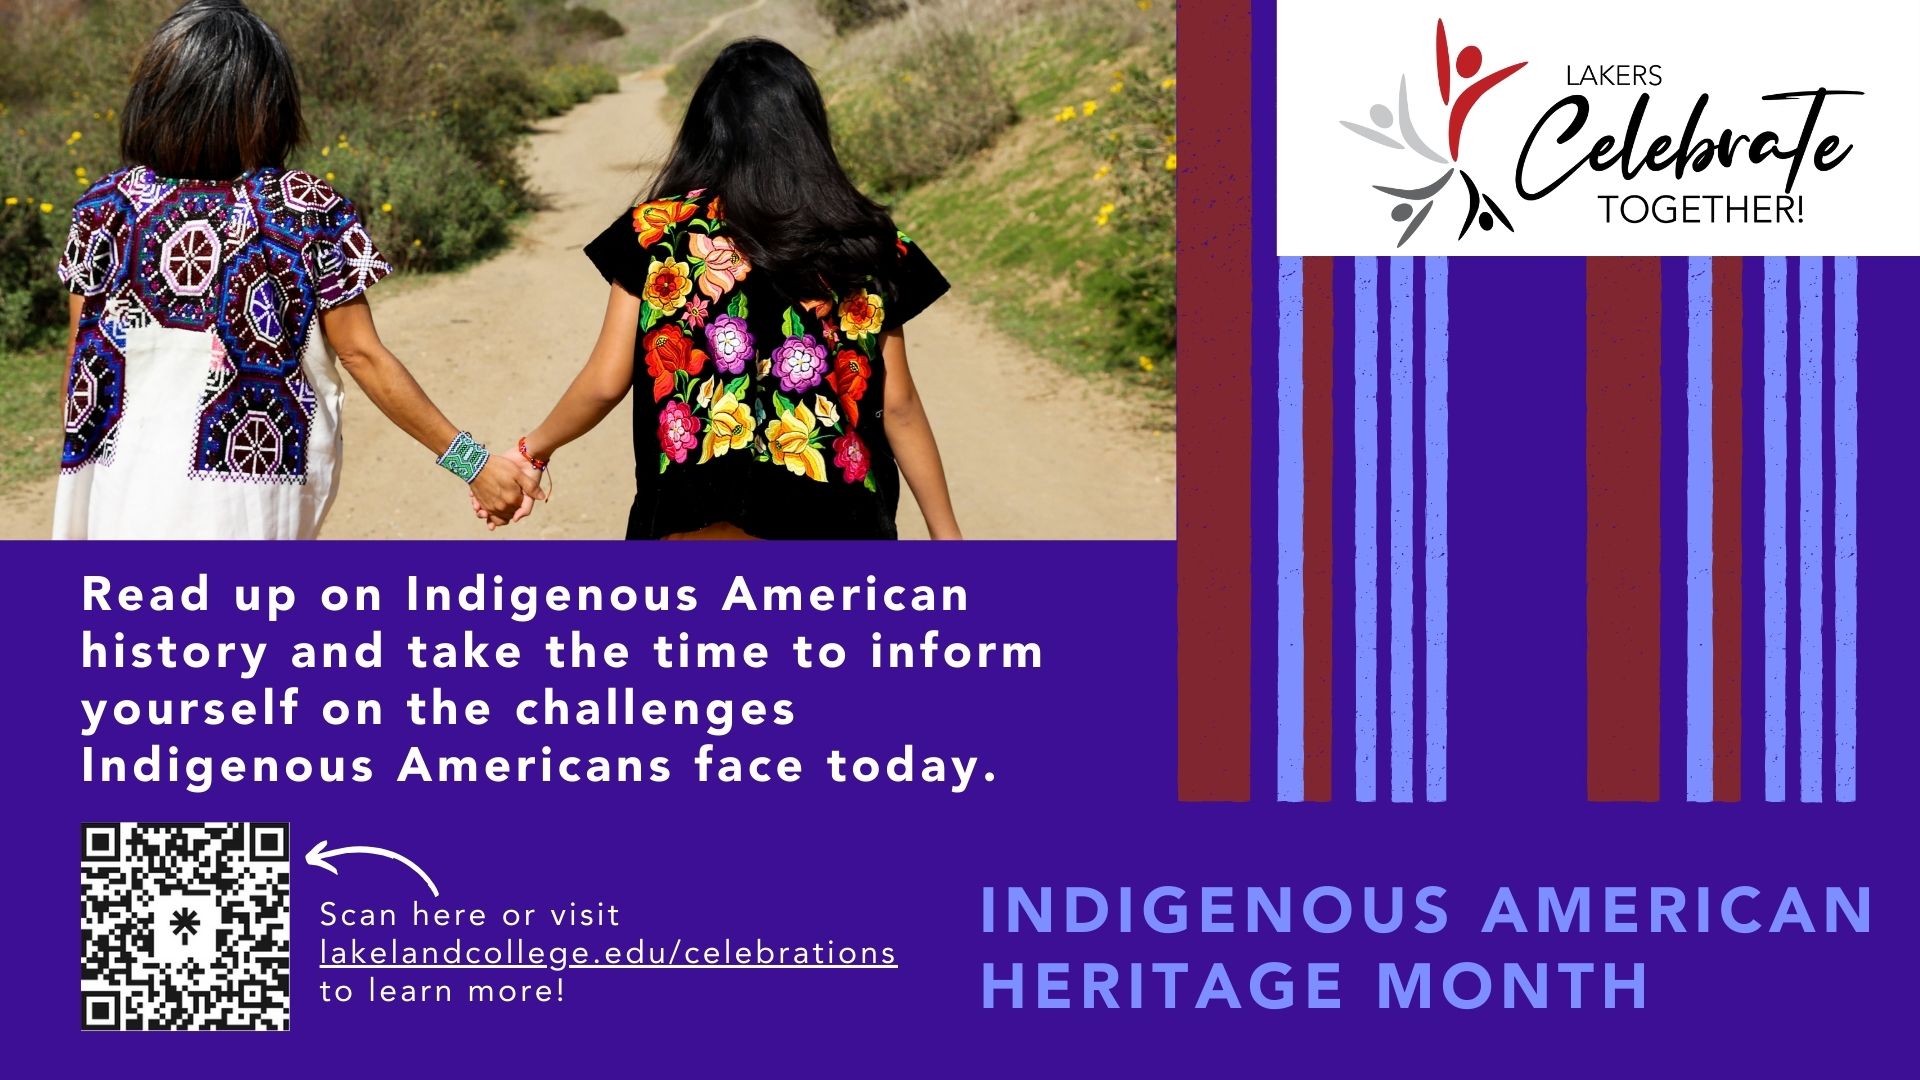 Indigenous American Heritage Month, two Indigenous women hold hands while walking down a dirt road with plant life on the sides